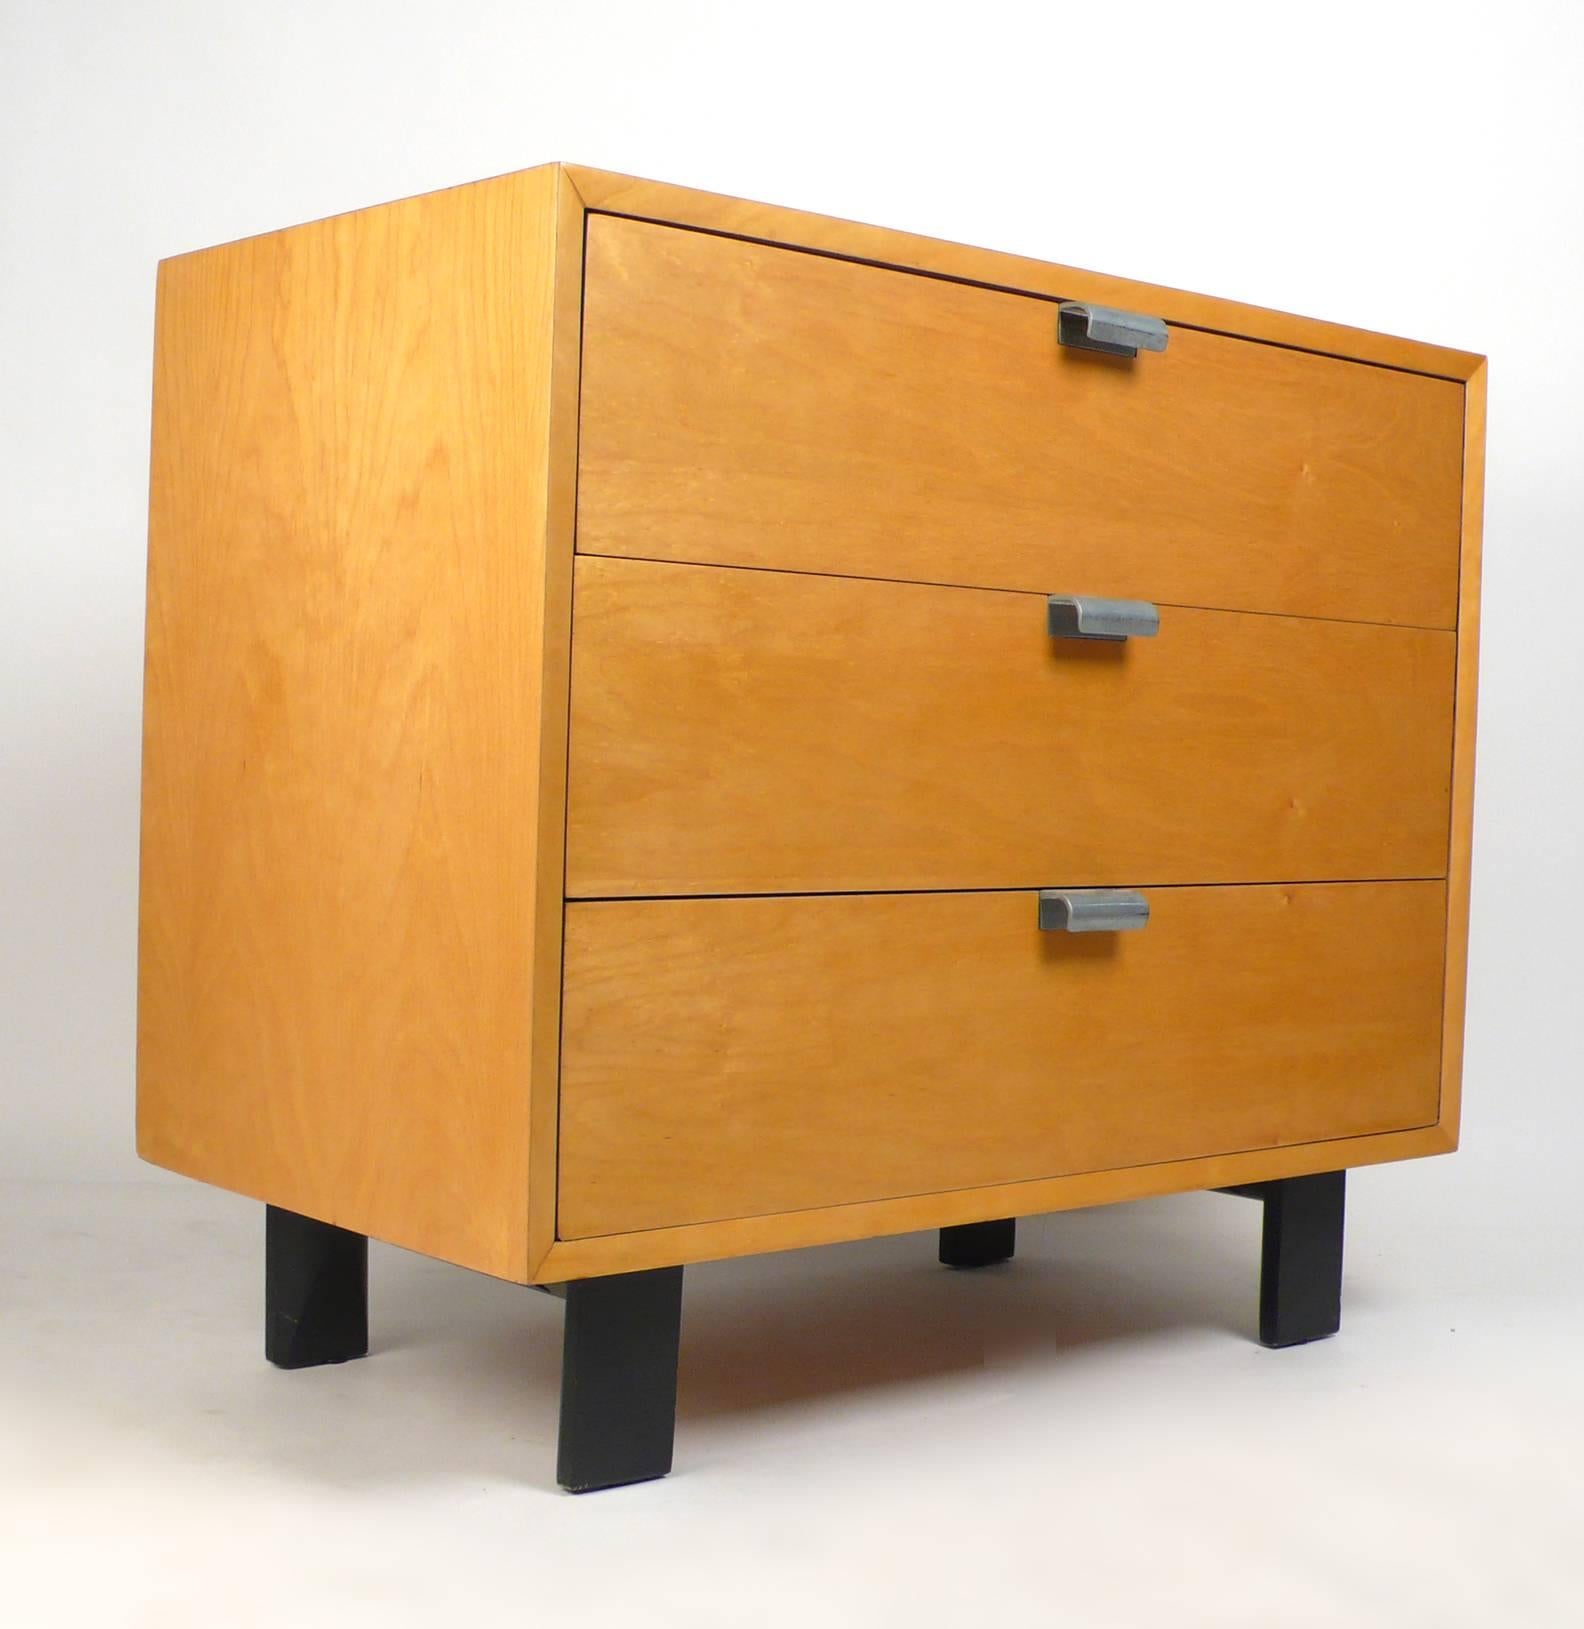 3 Drawer Chest by George Nelson for Herman Miller. Very good condition.